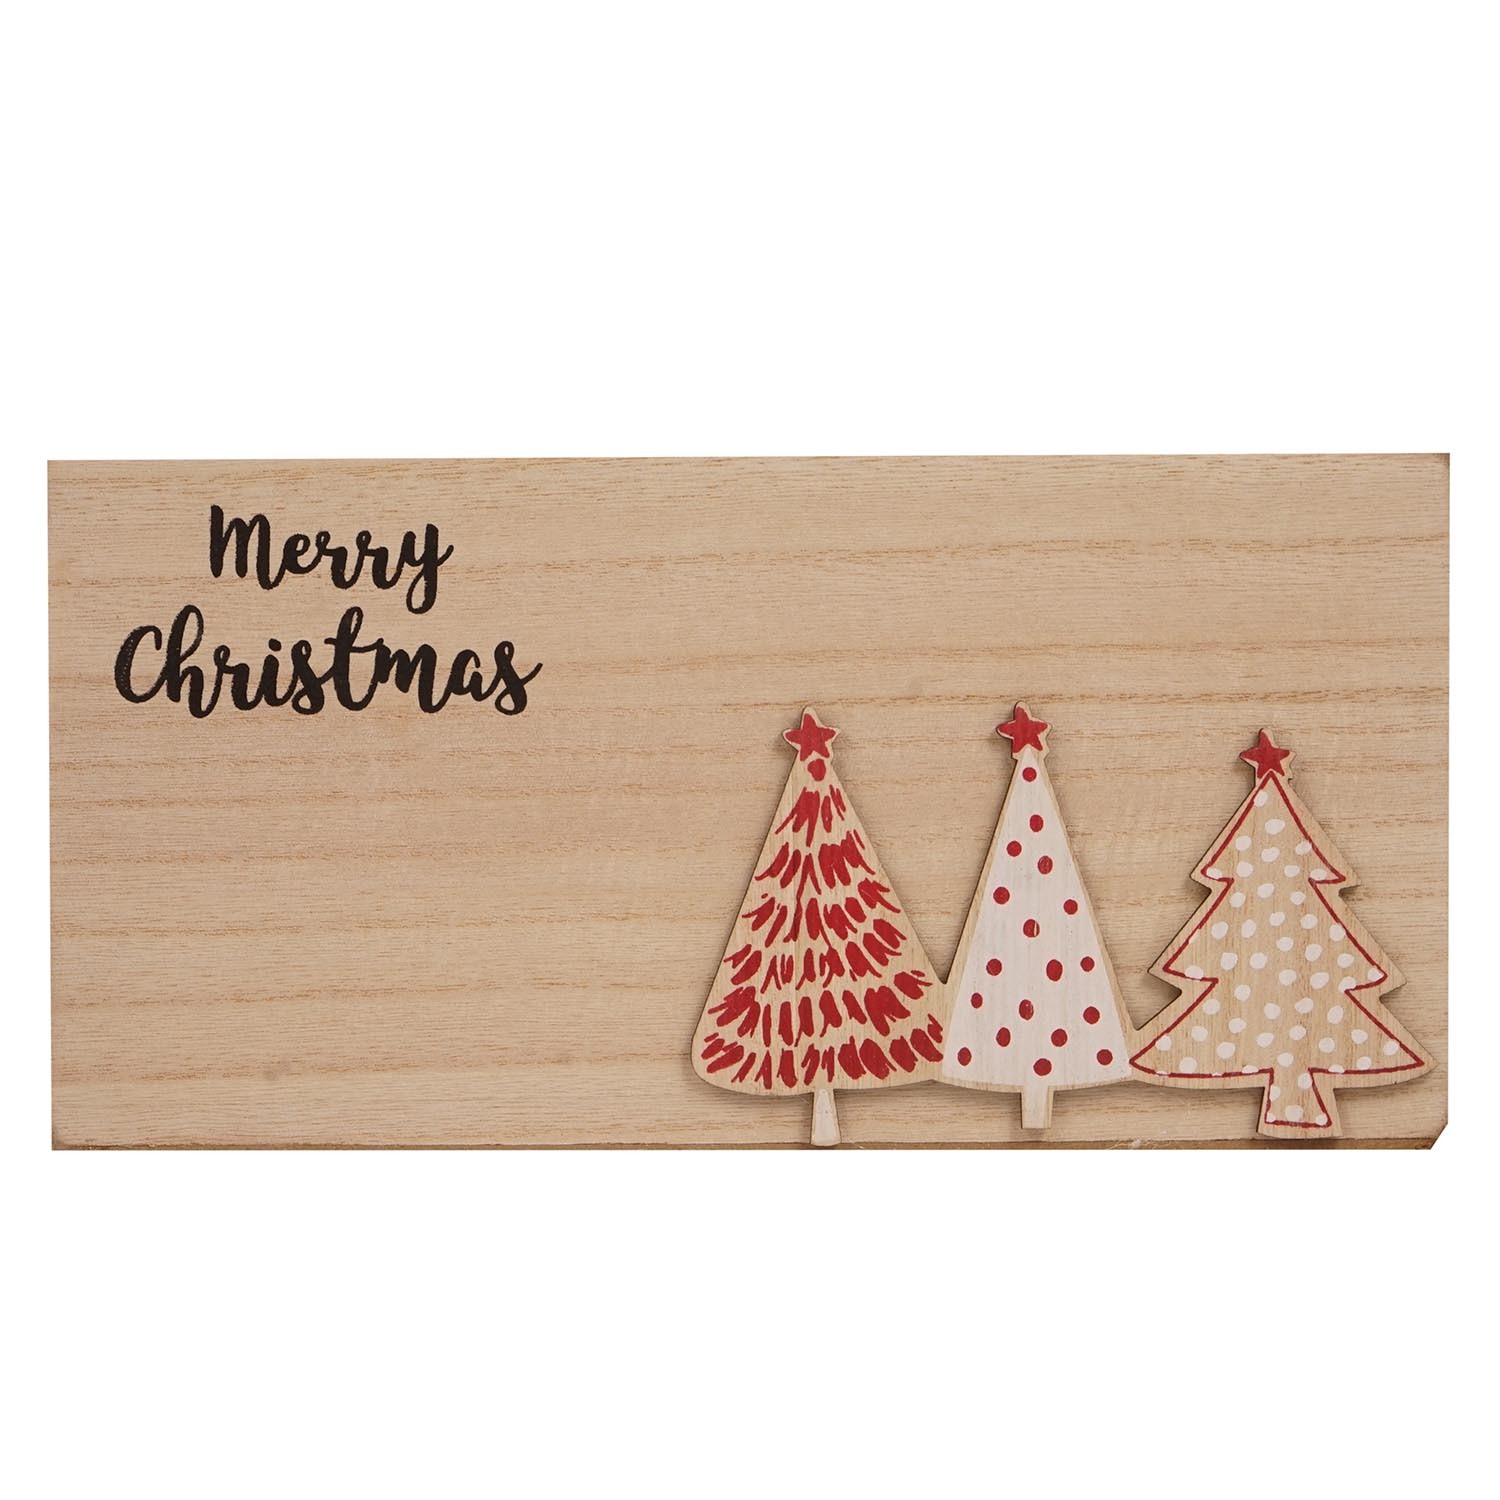 Merry Christmas Wooden Crate - Natural Image 1